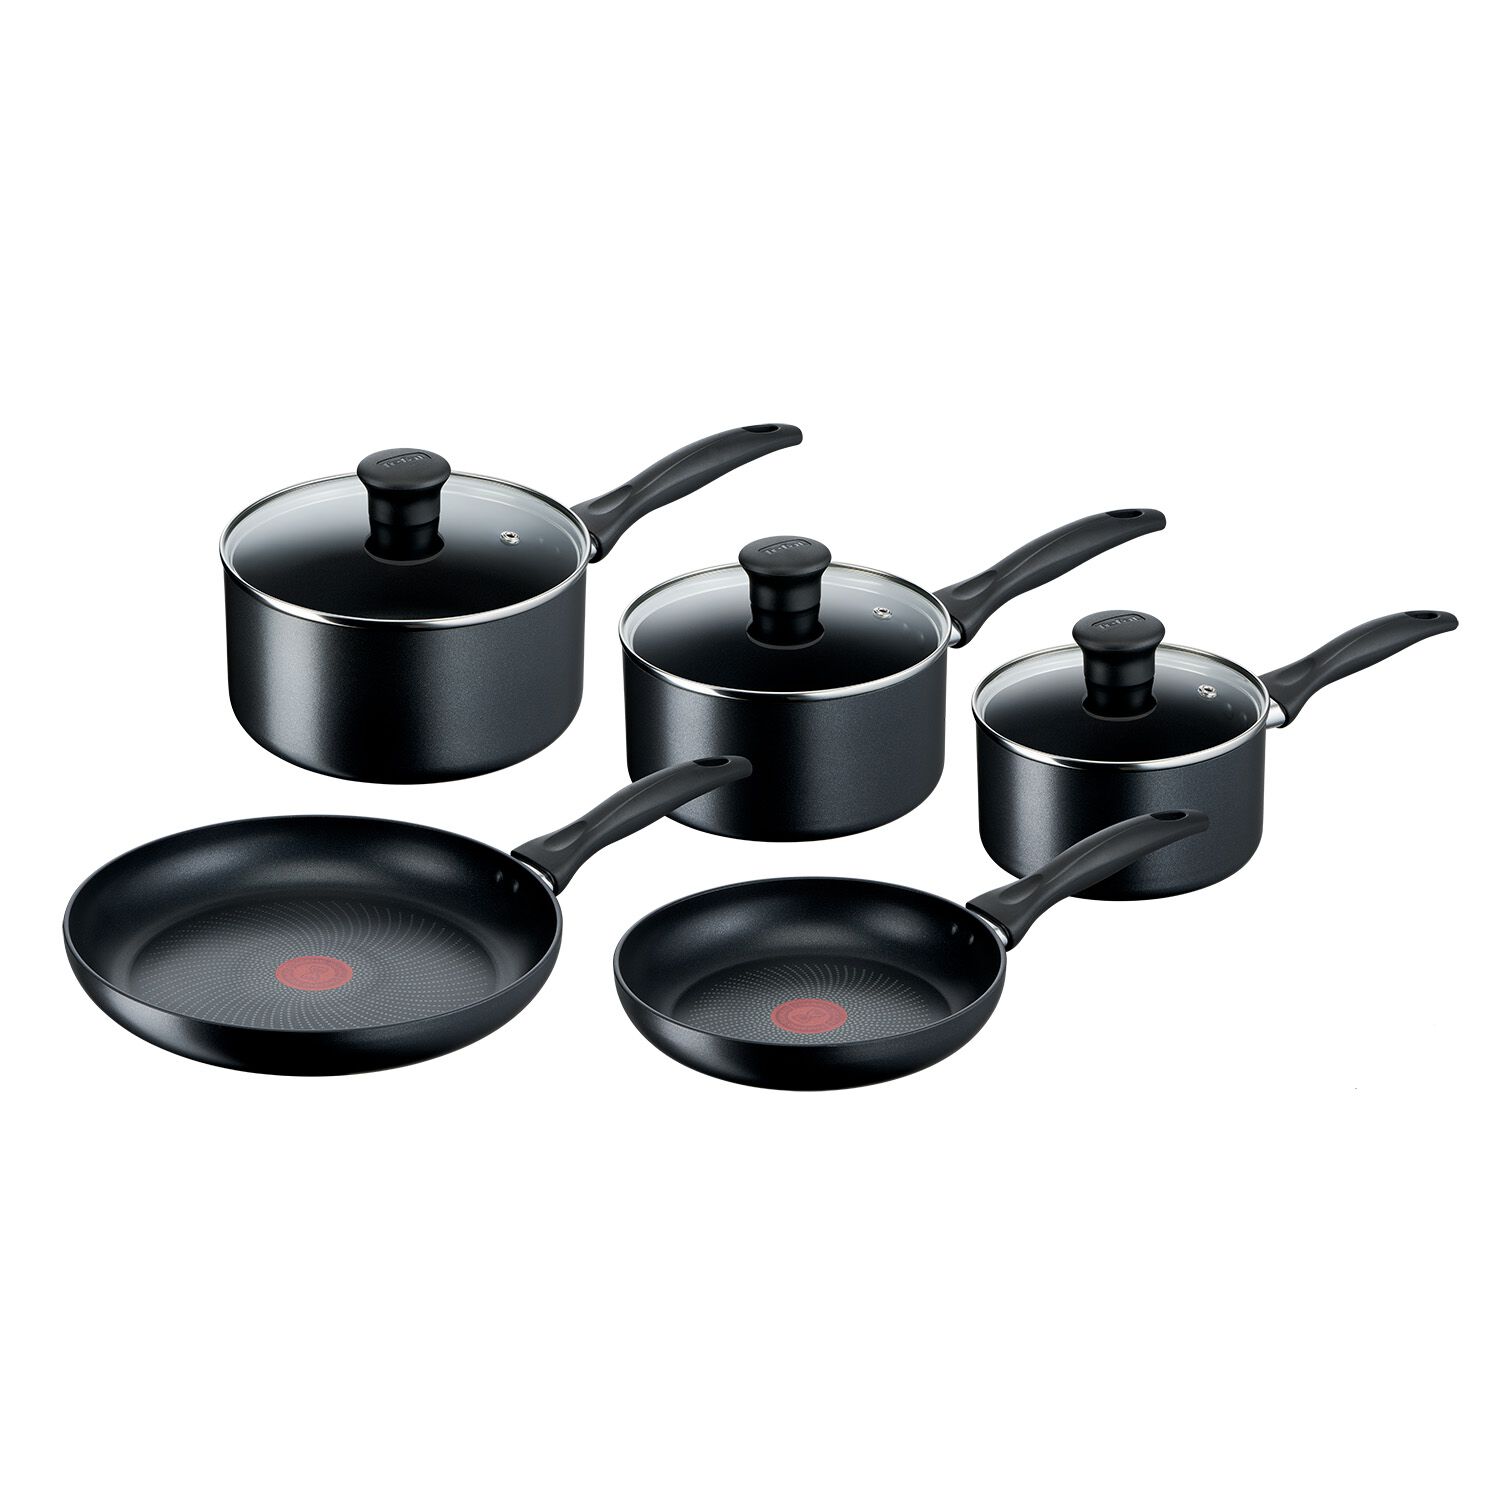 Tefal Induction Black 5 Piece Cookware Set - Home Store + More